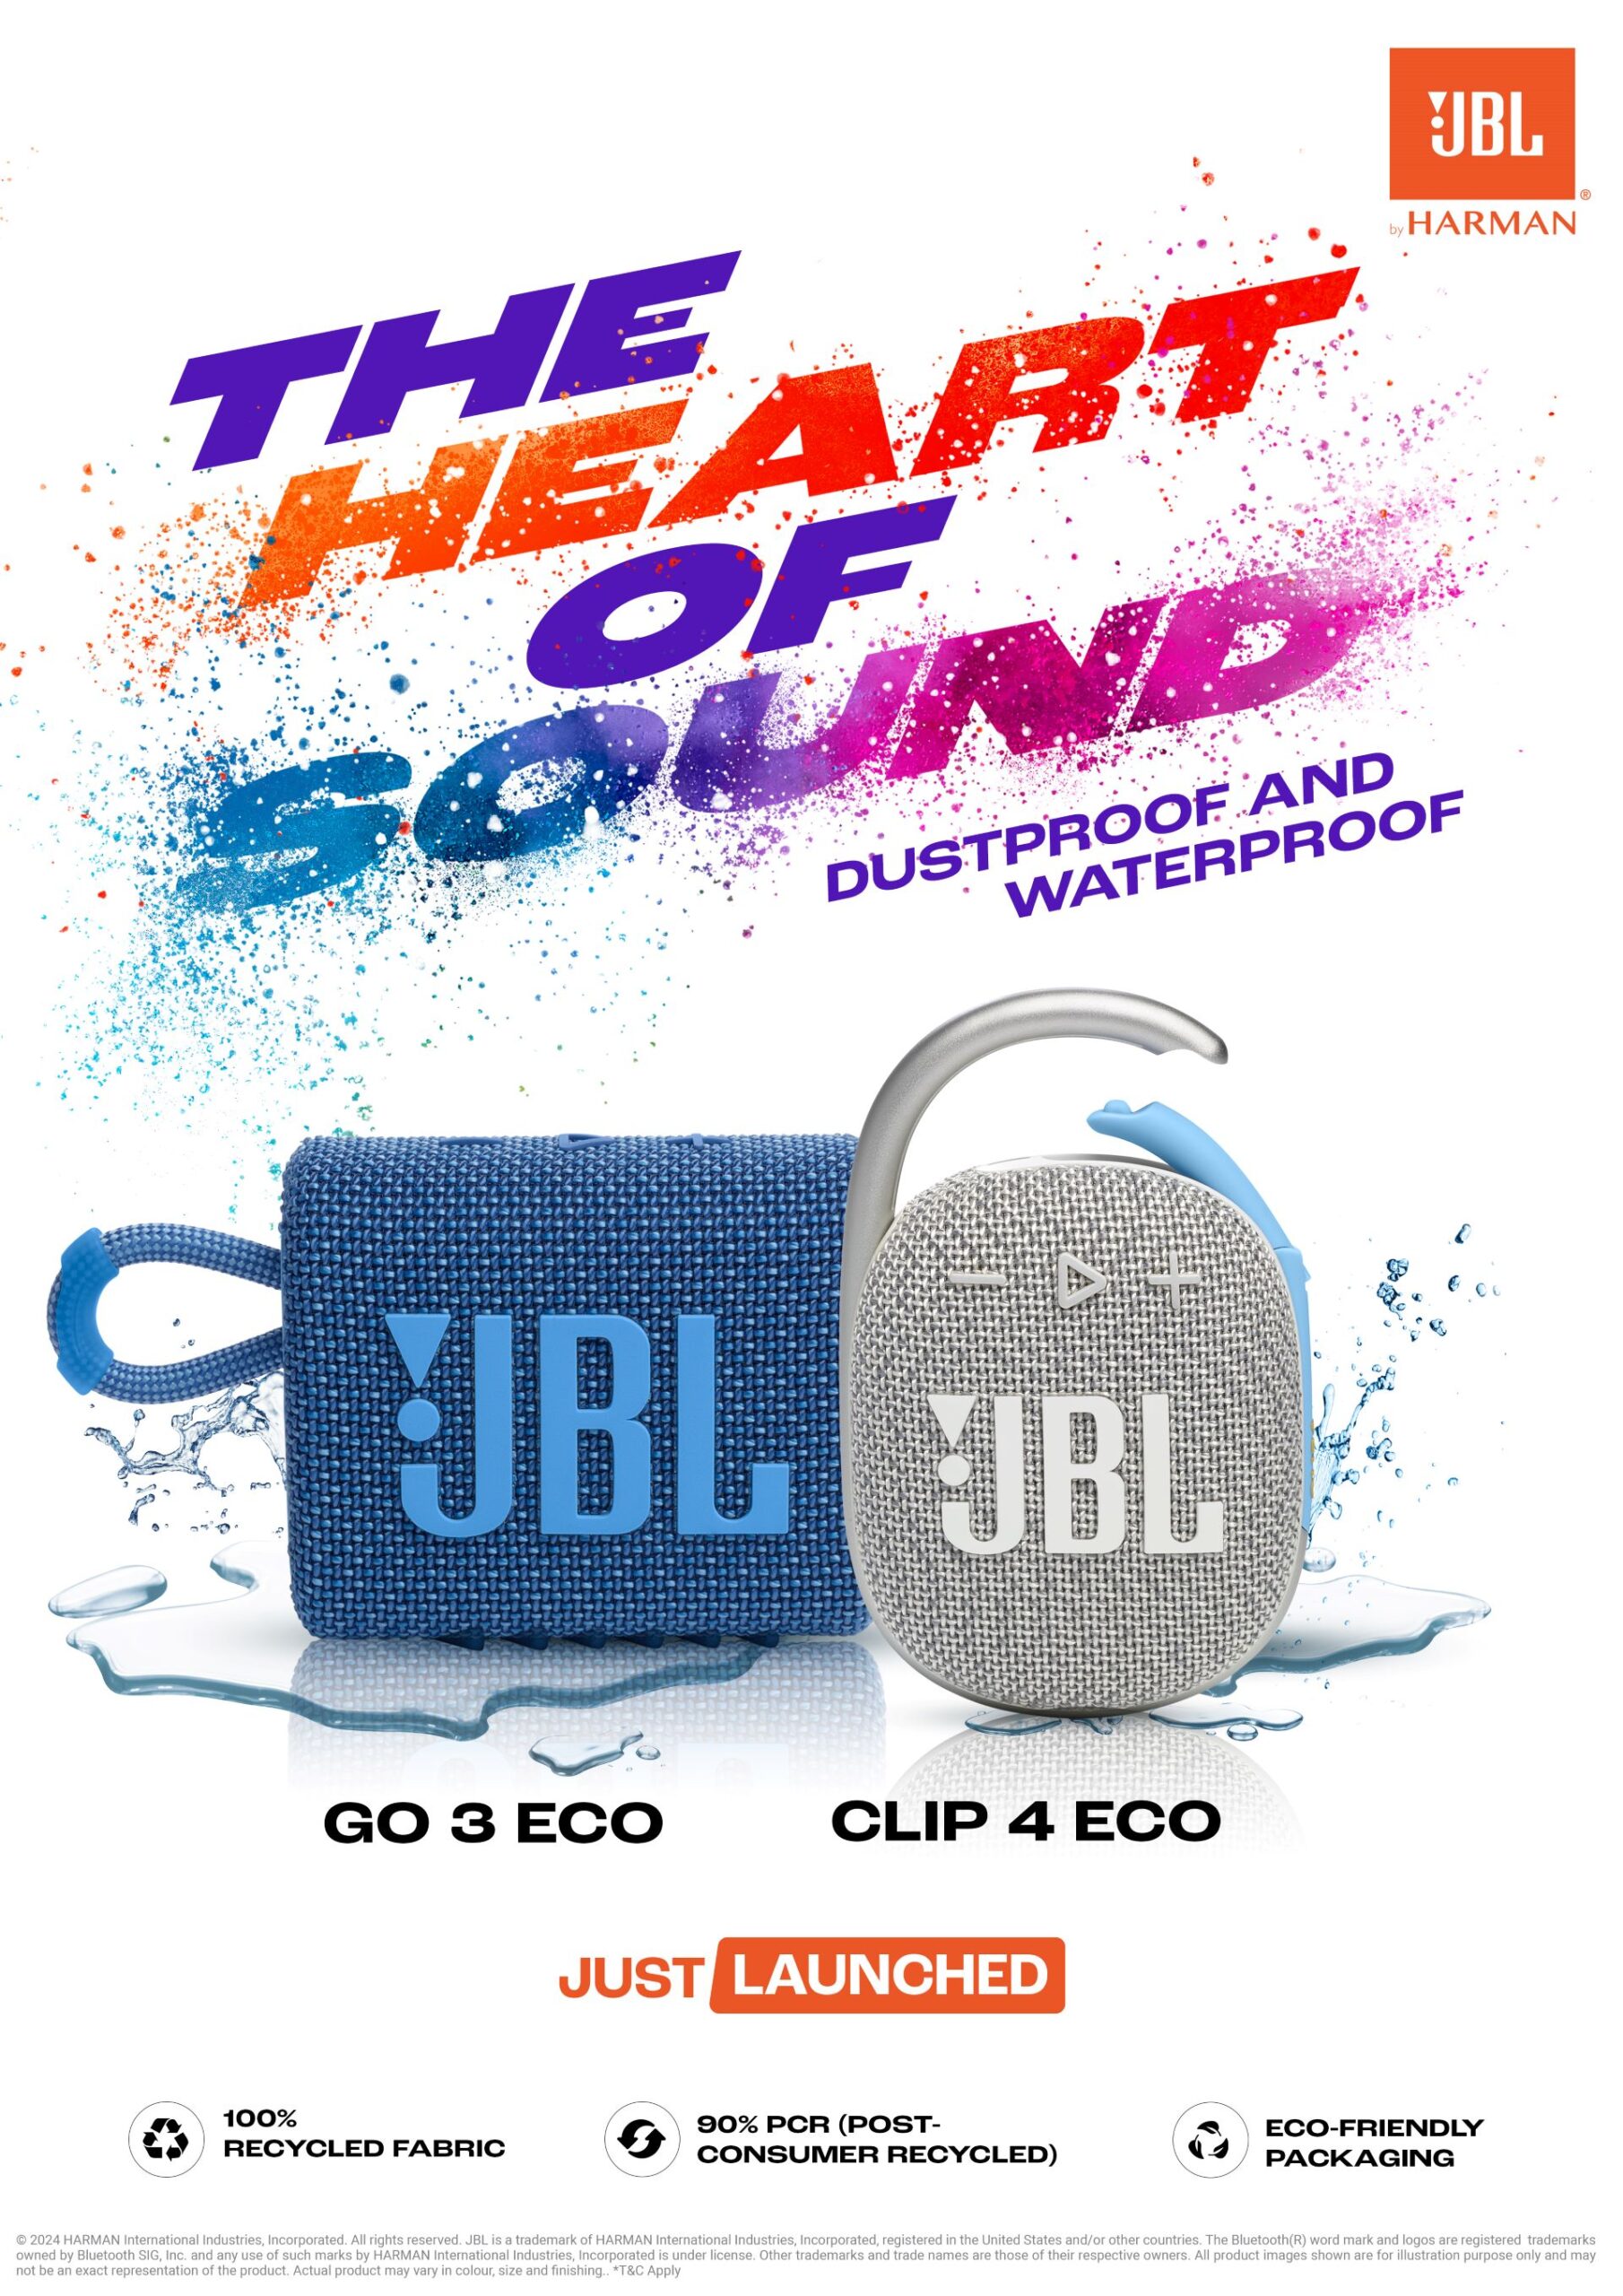 JBL Launches Eco-Friendly Speakers for Holi Festival